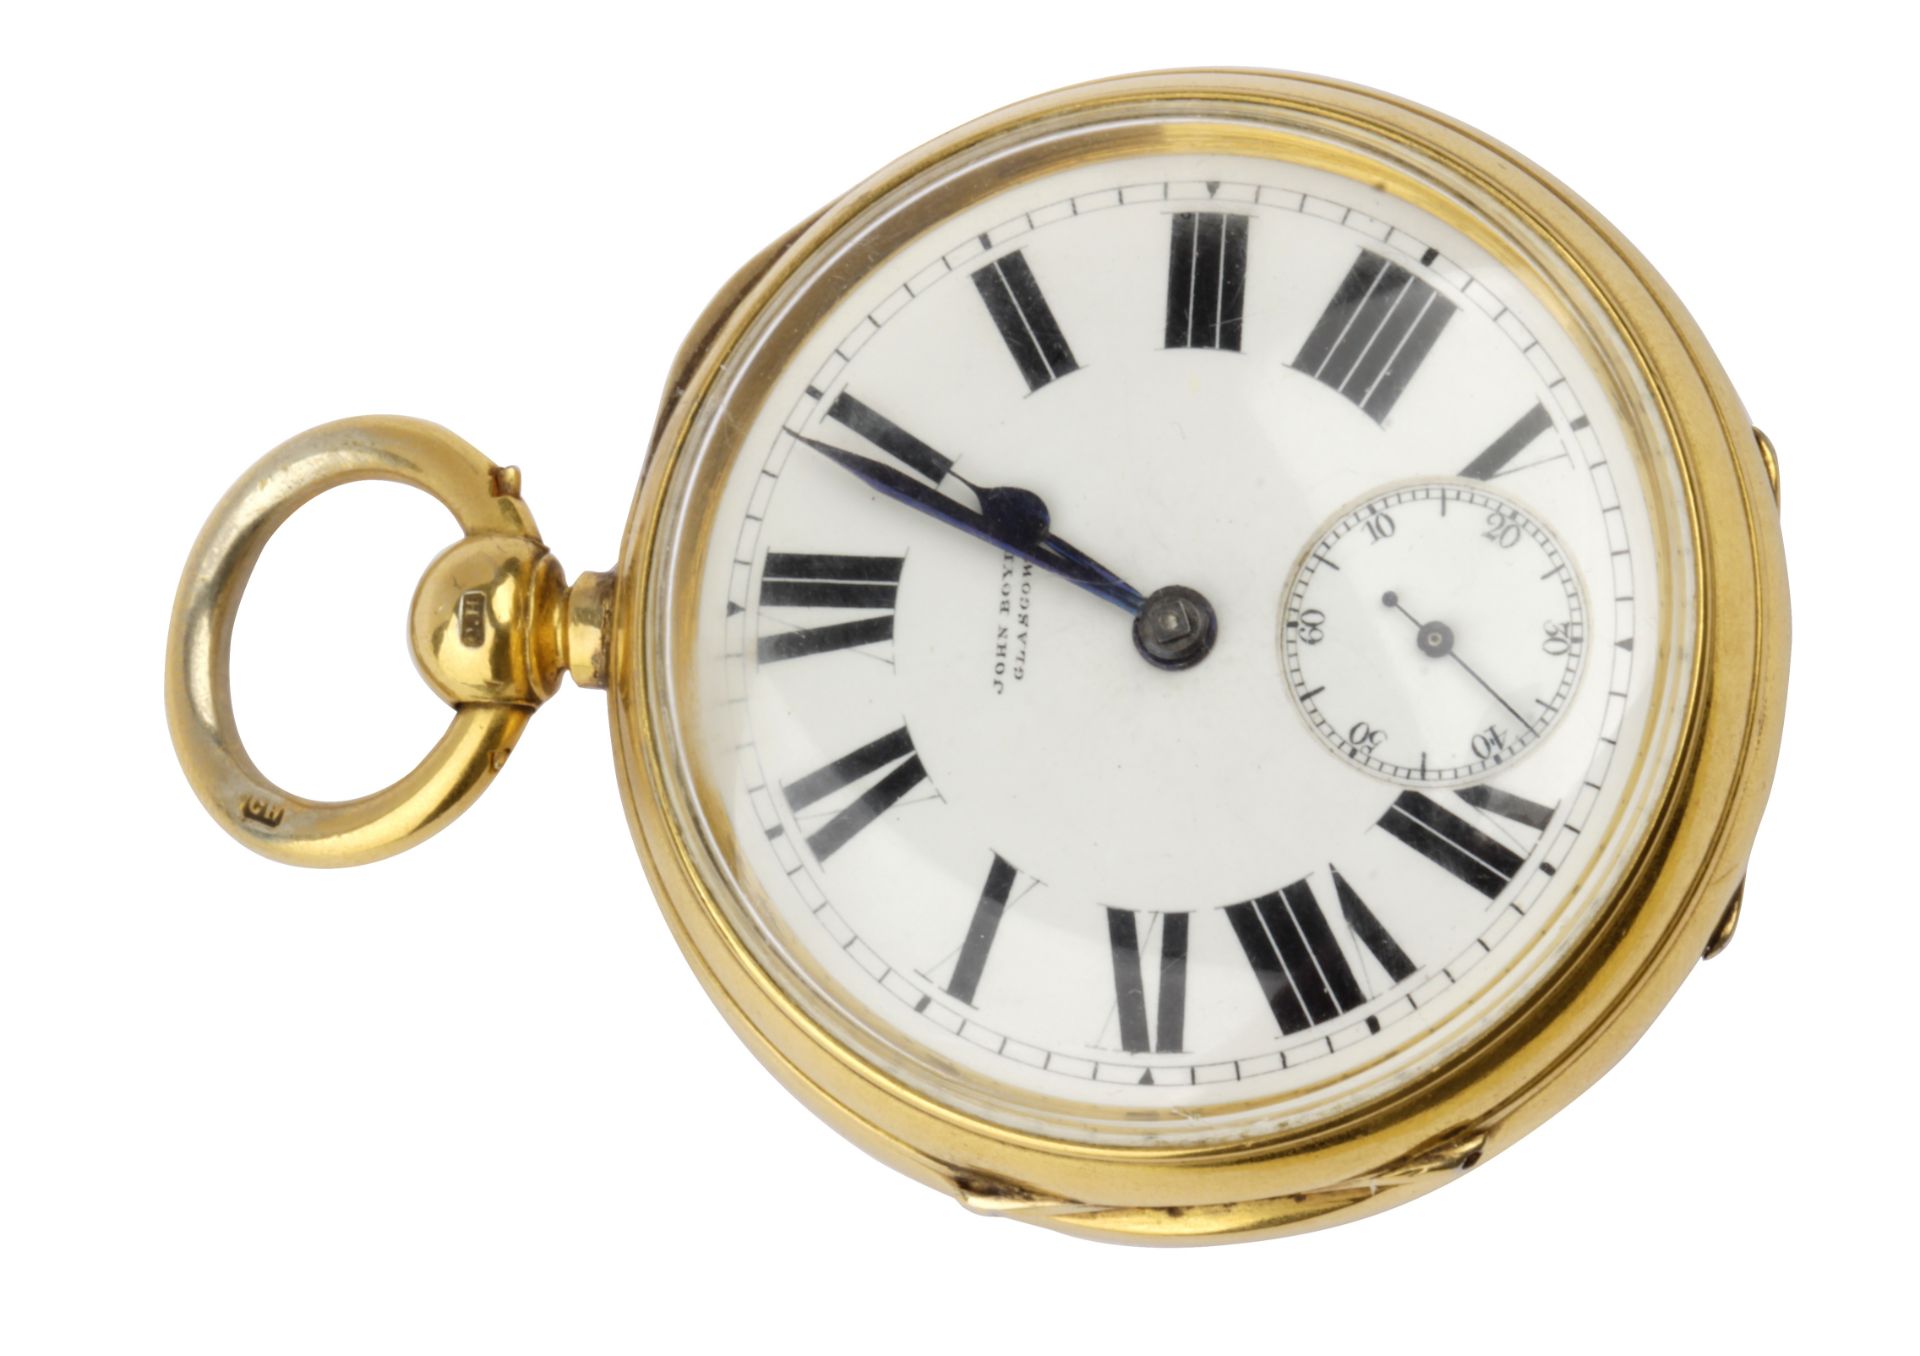 William Bullock. Late 19th century English gold plated open face pocket watch